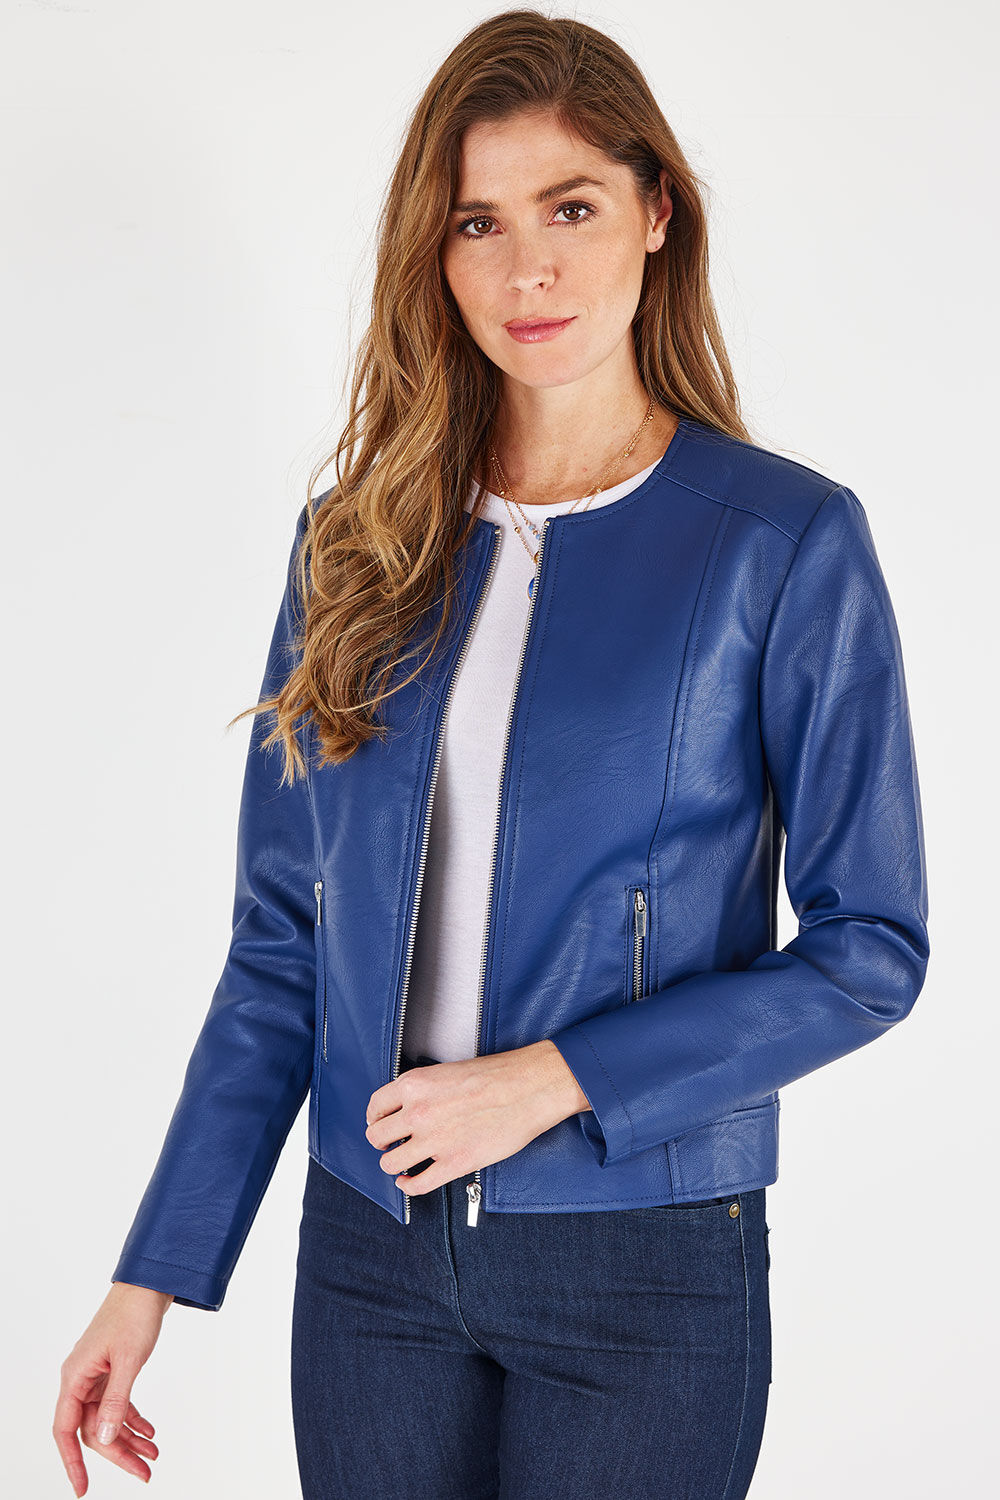 Bonmarche Navy Faux Leather Collarless Jacket, Size: 12